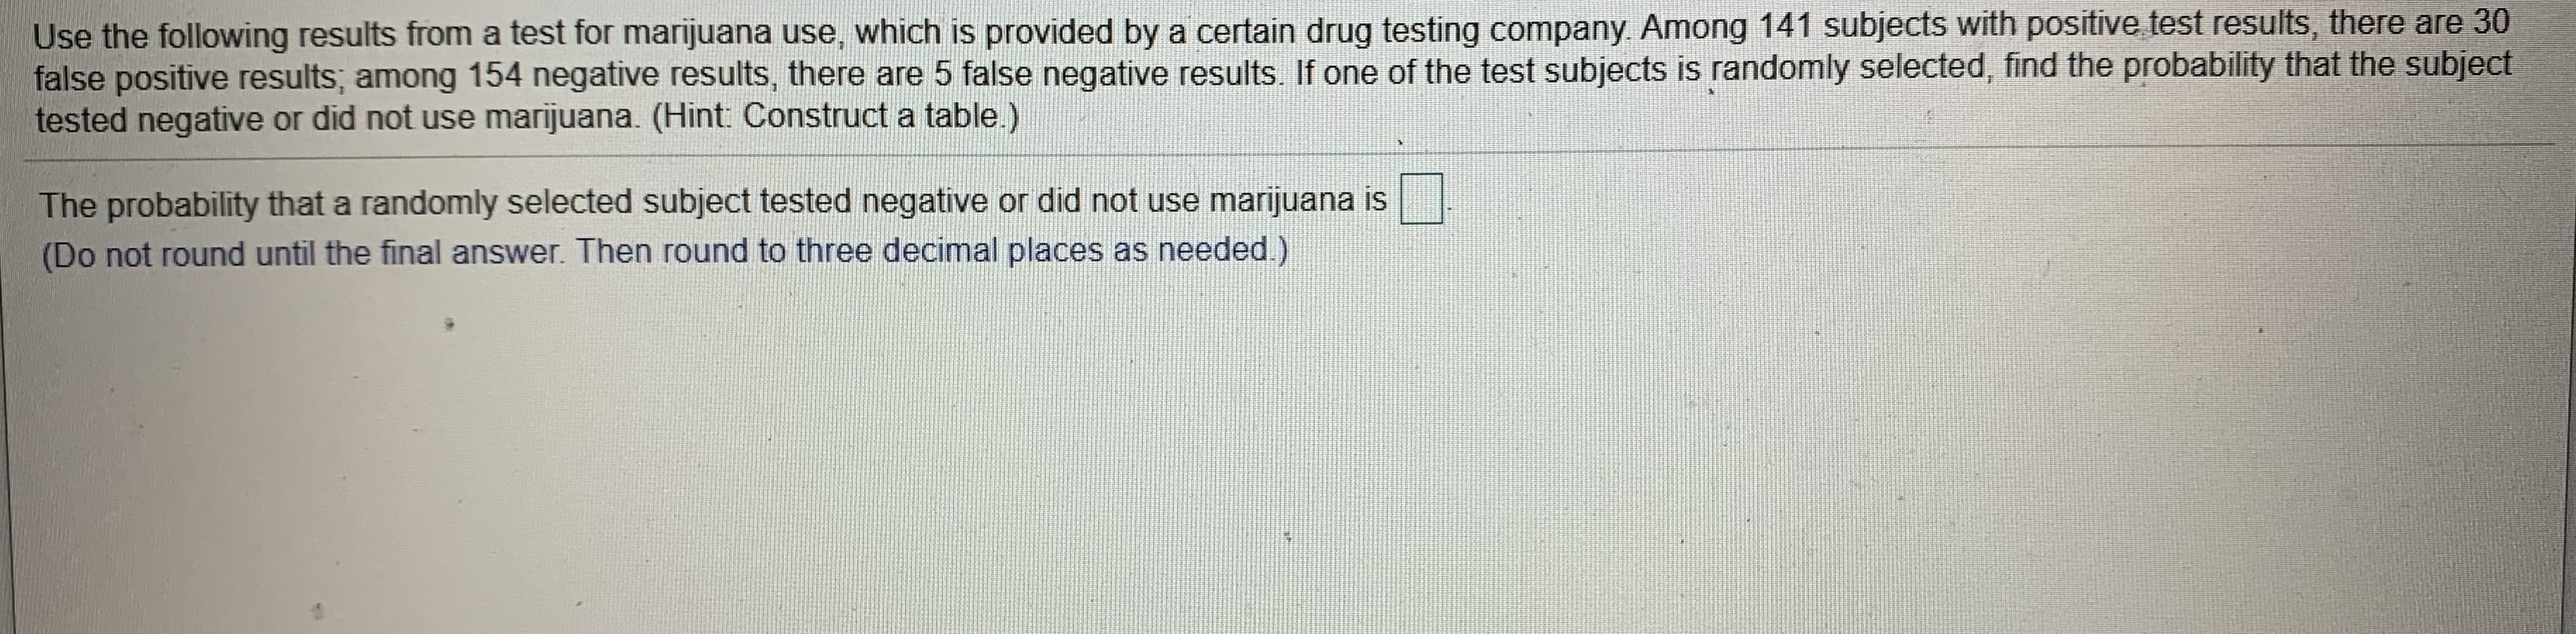 Use the following results from a test for marijuana use, which is provided by a certain drug testing company. Among 141 subjects with positive test results, there are 30
false positive results; among 154 negative results, there are 5 false negative results. If one of the test subjects is randomly selected, find the probability that the subject
tested negative or did not use marijuana. (Hint: Construct a table.)
The probability that a randomly selected subject tested negative or did not use marijuana is
(Do not round until the final answer. Then round to three decimal places as needed.)
